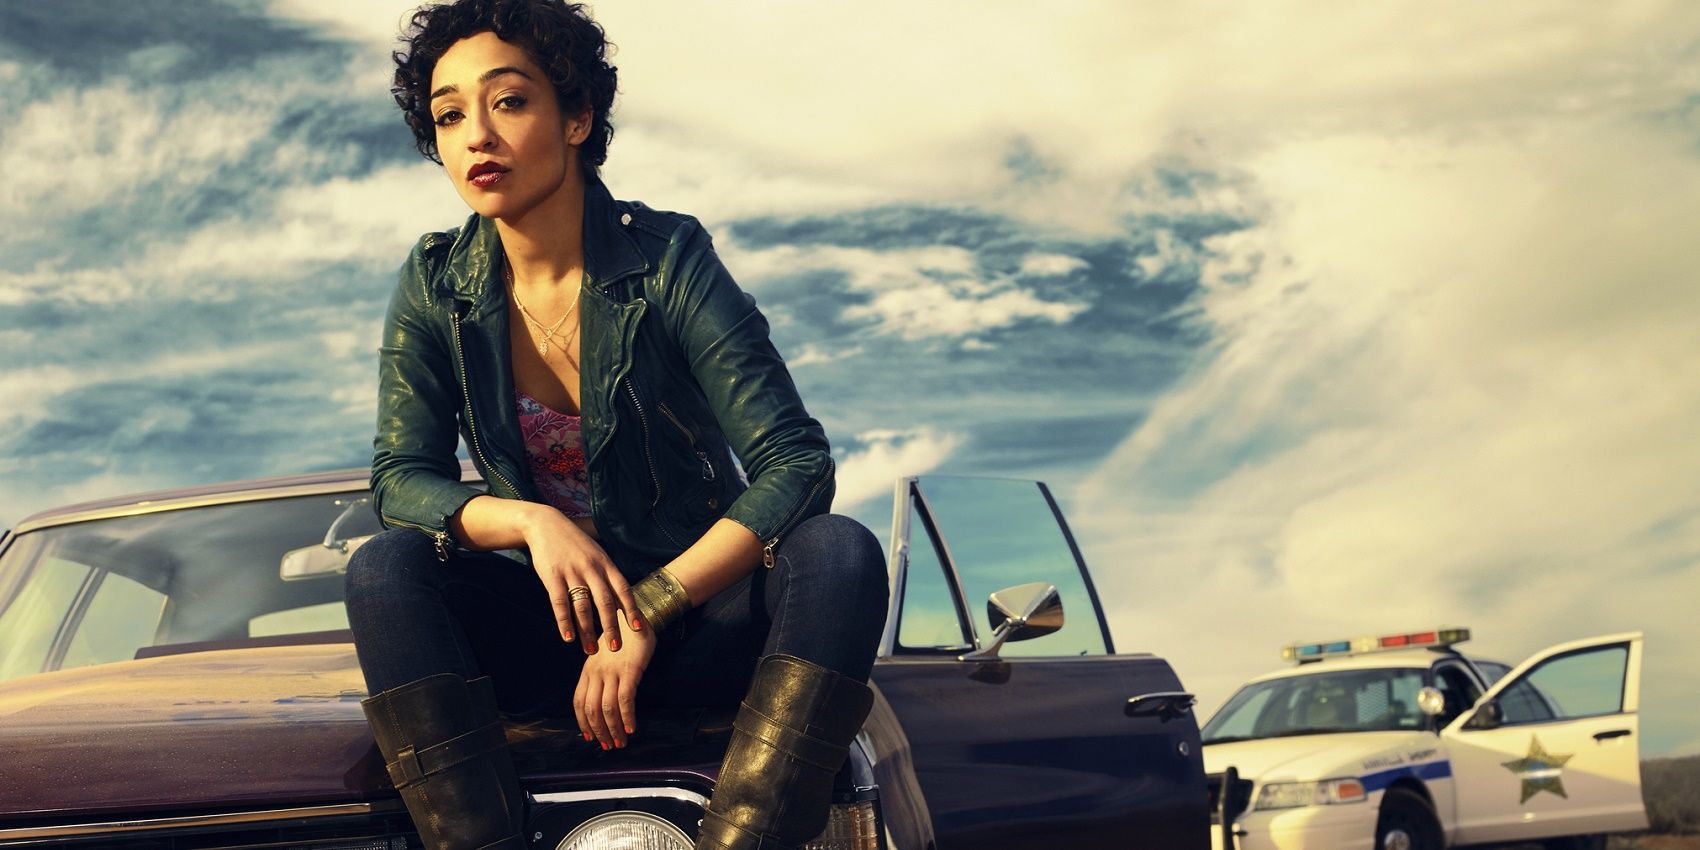 Tulip sits on the hood of a car in a Preacher promo image